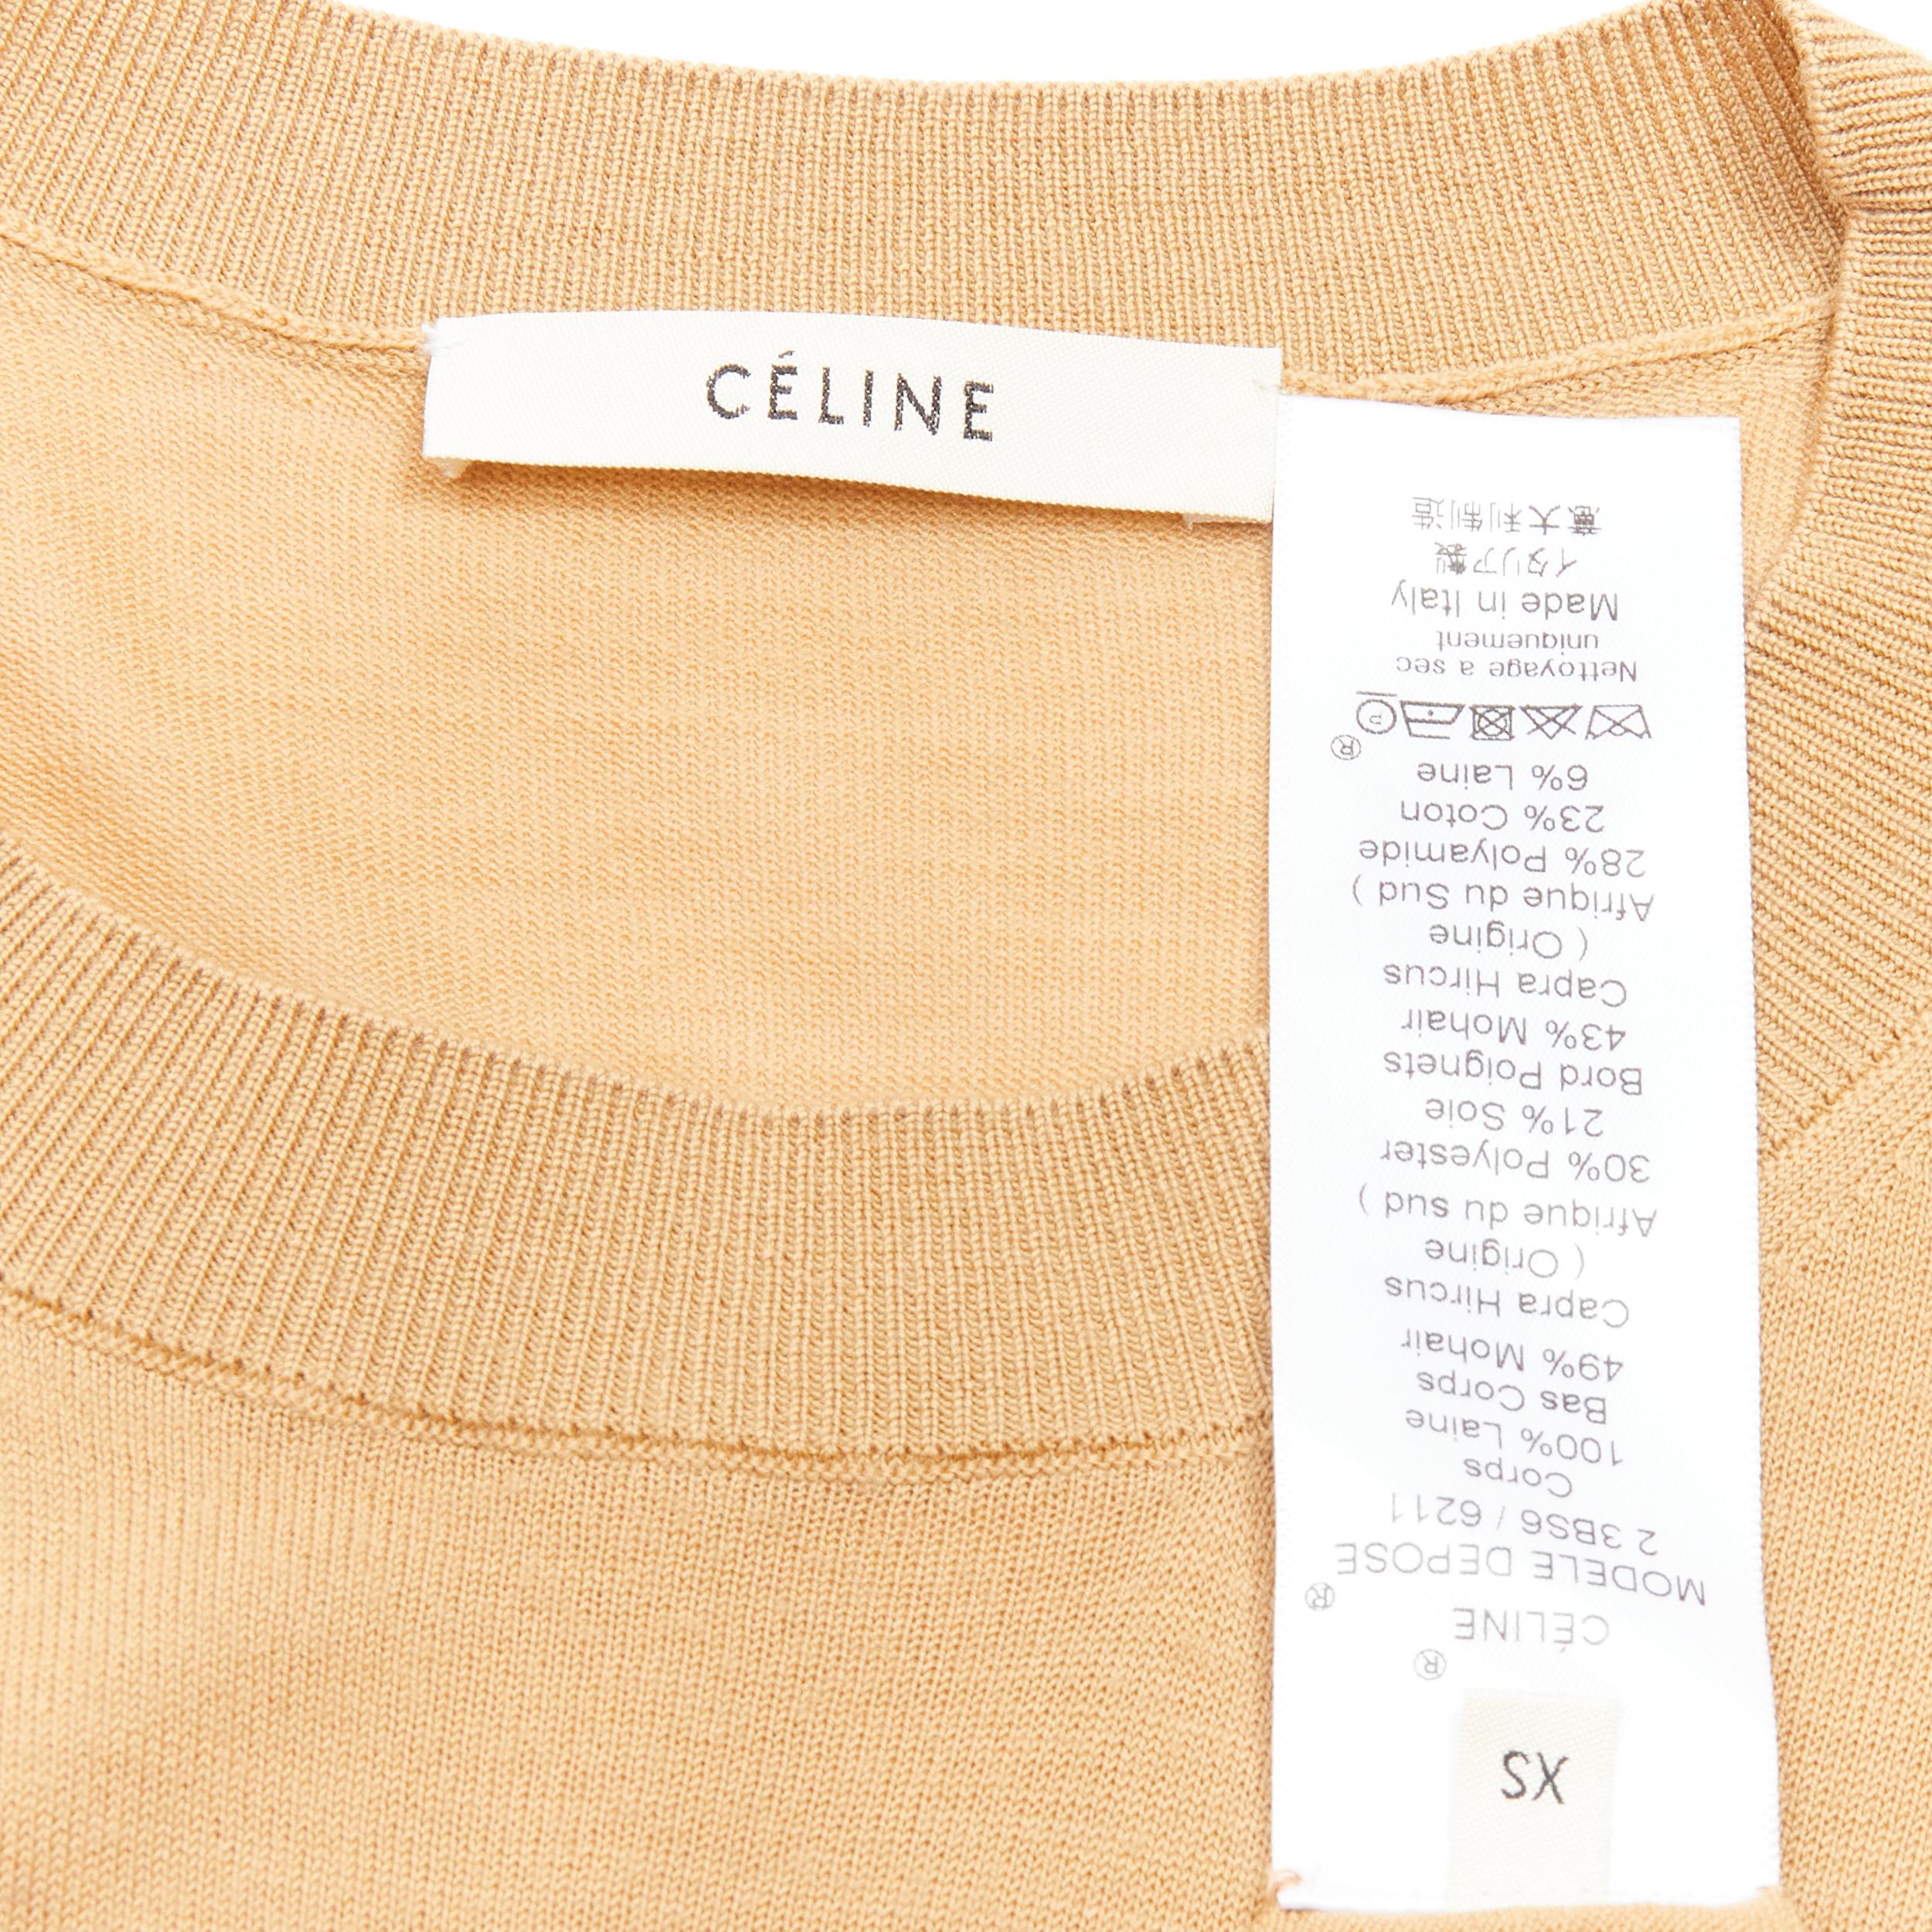 OLD CELINE Phoebe Philo wool mohair blend Triomphe logo contrast cuff sweater  For Sale 4